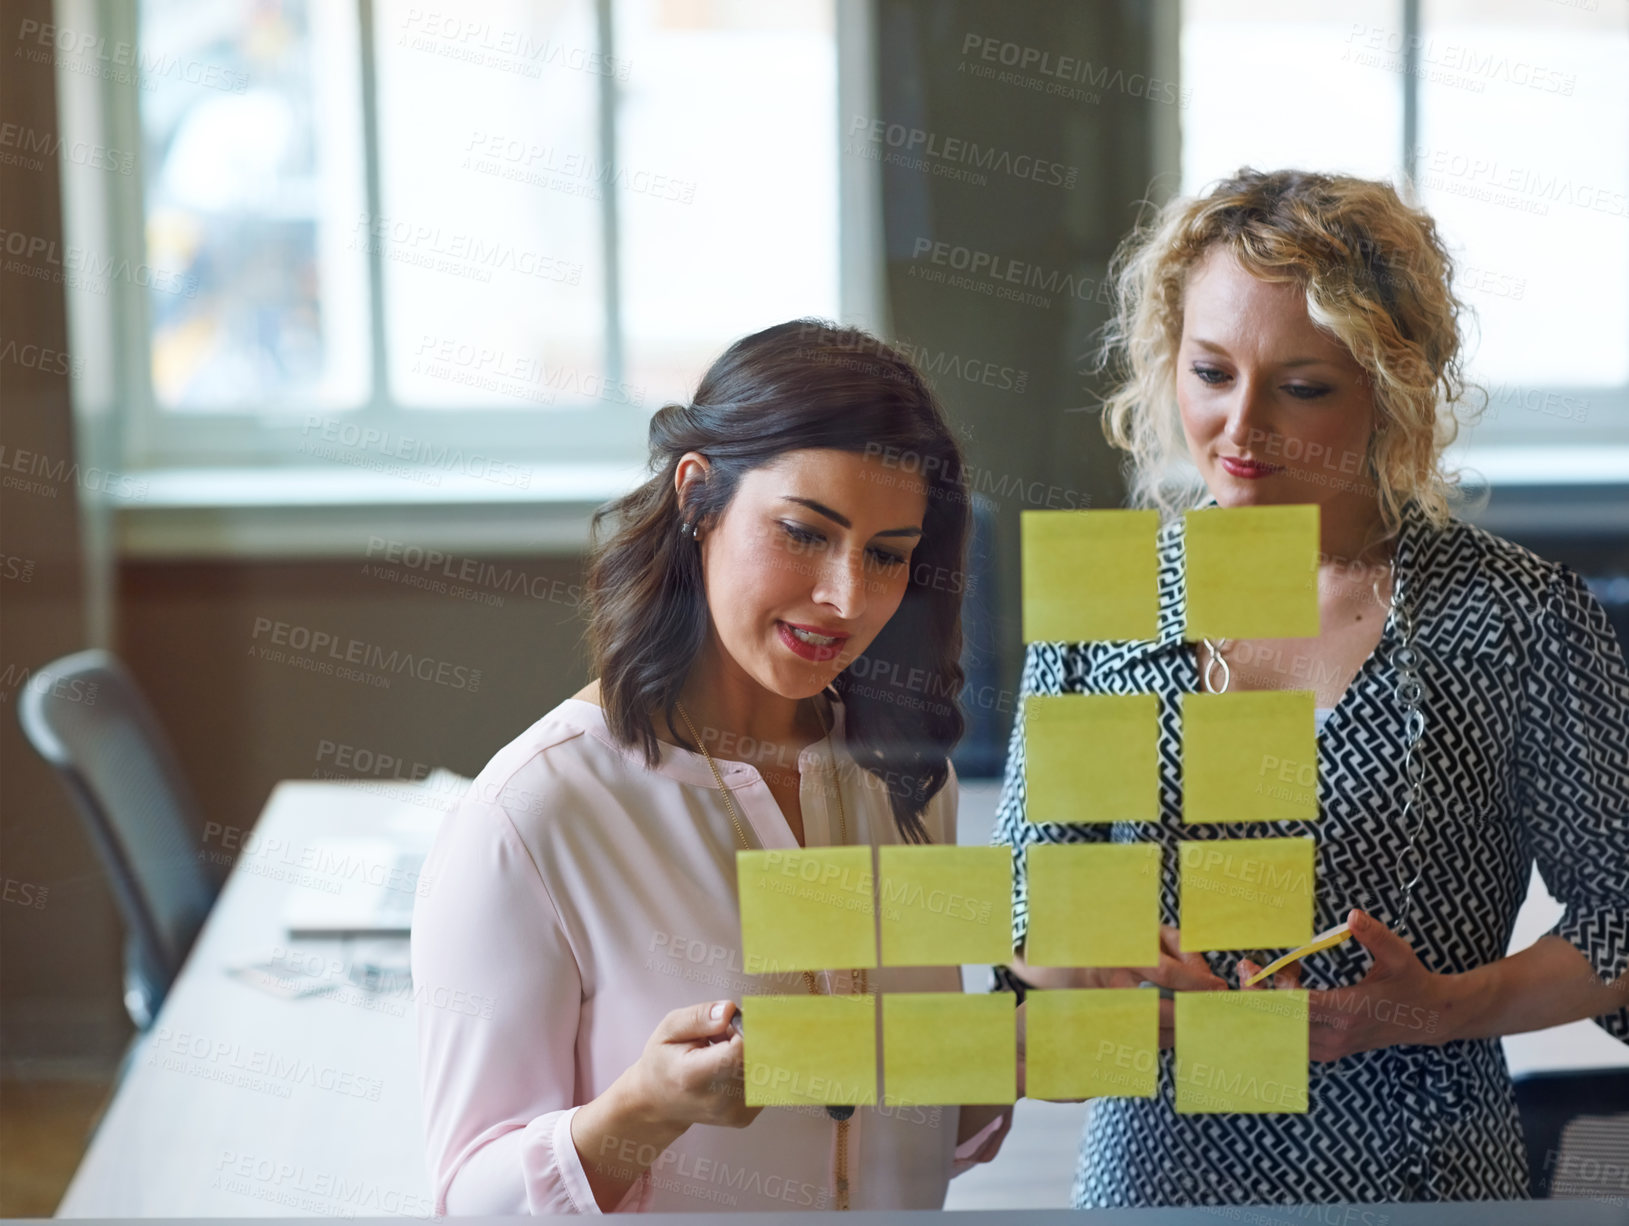 Buy stock photo Shot of two businesswomen brainstorming with adhesive notes on a glass wall in an office